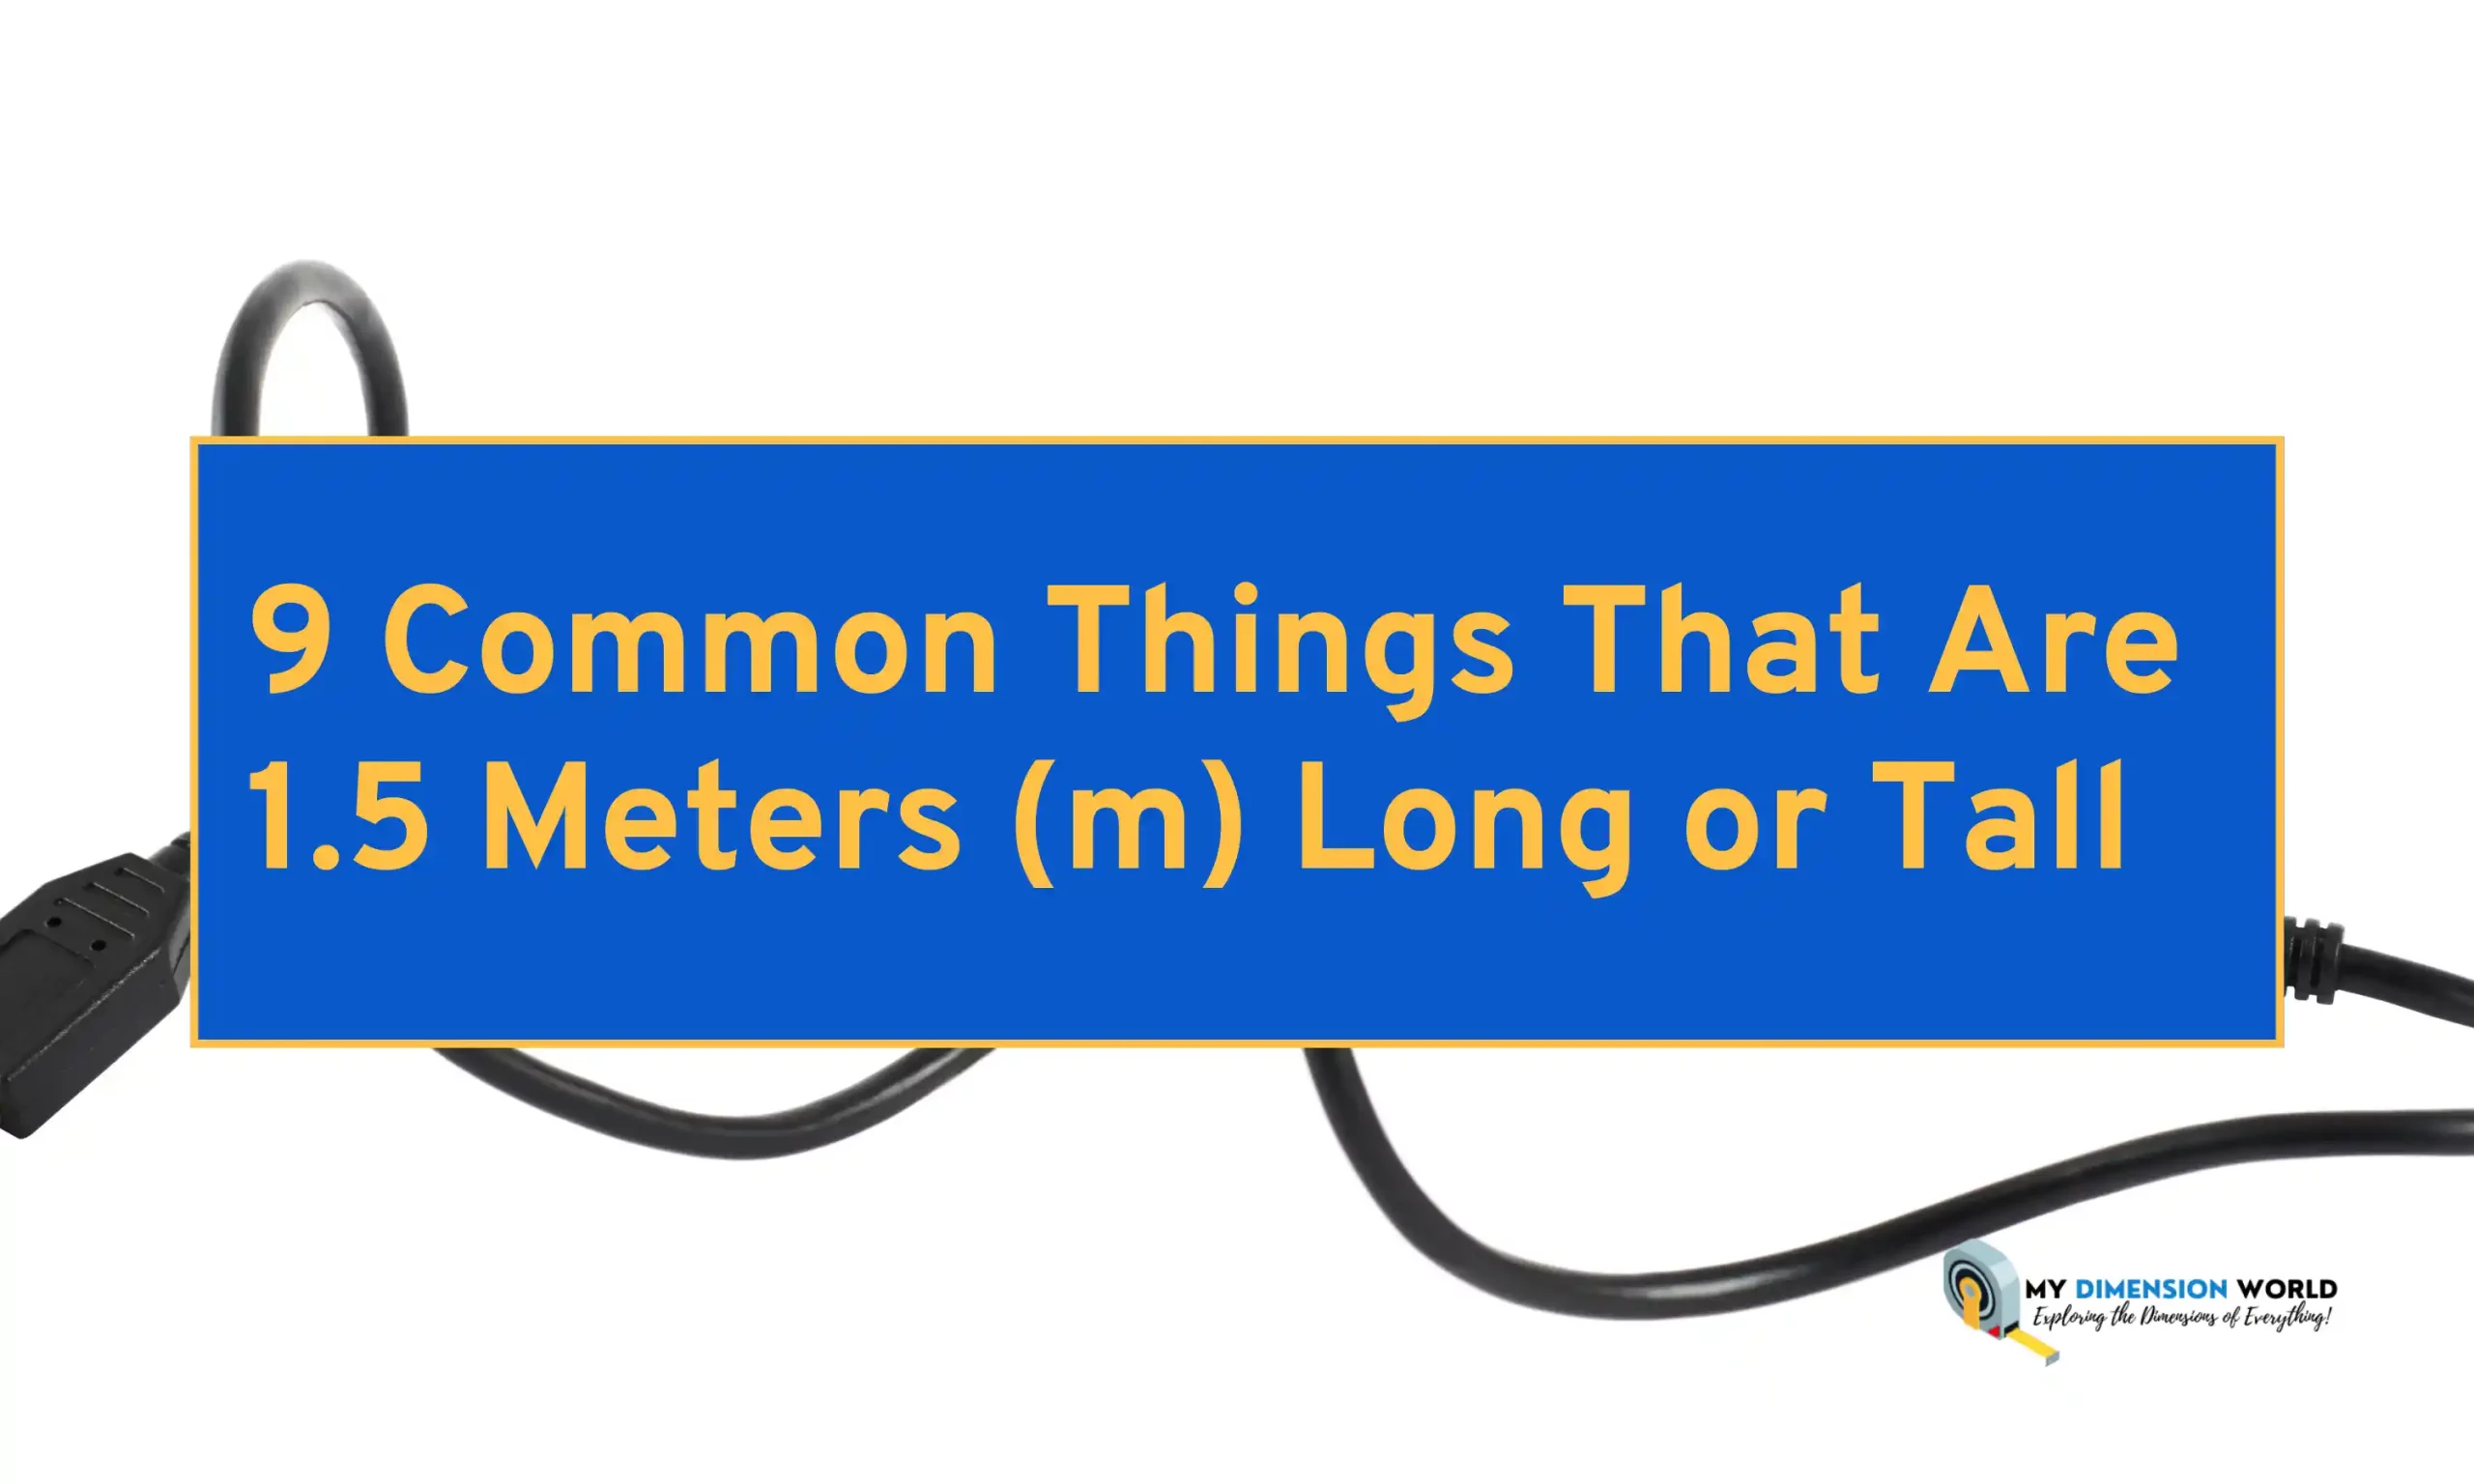 9 Common Things That Are 1.5 Meters (m) Long or Tall